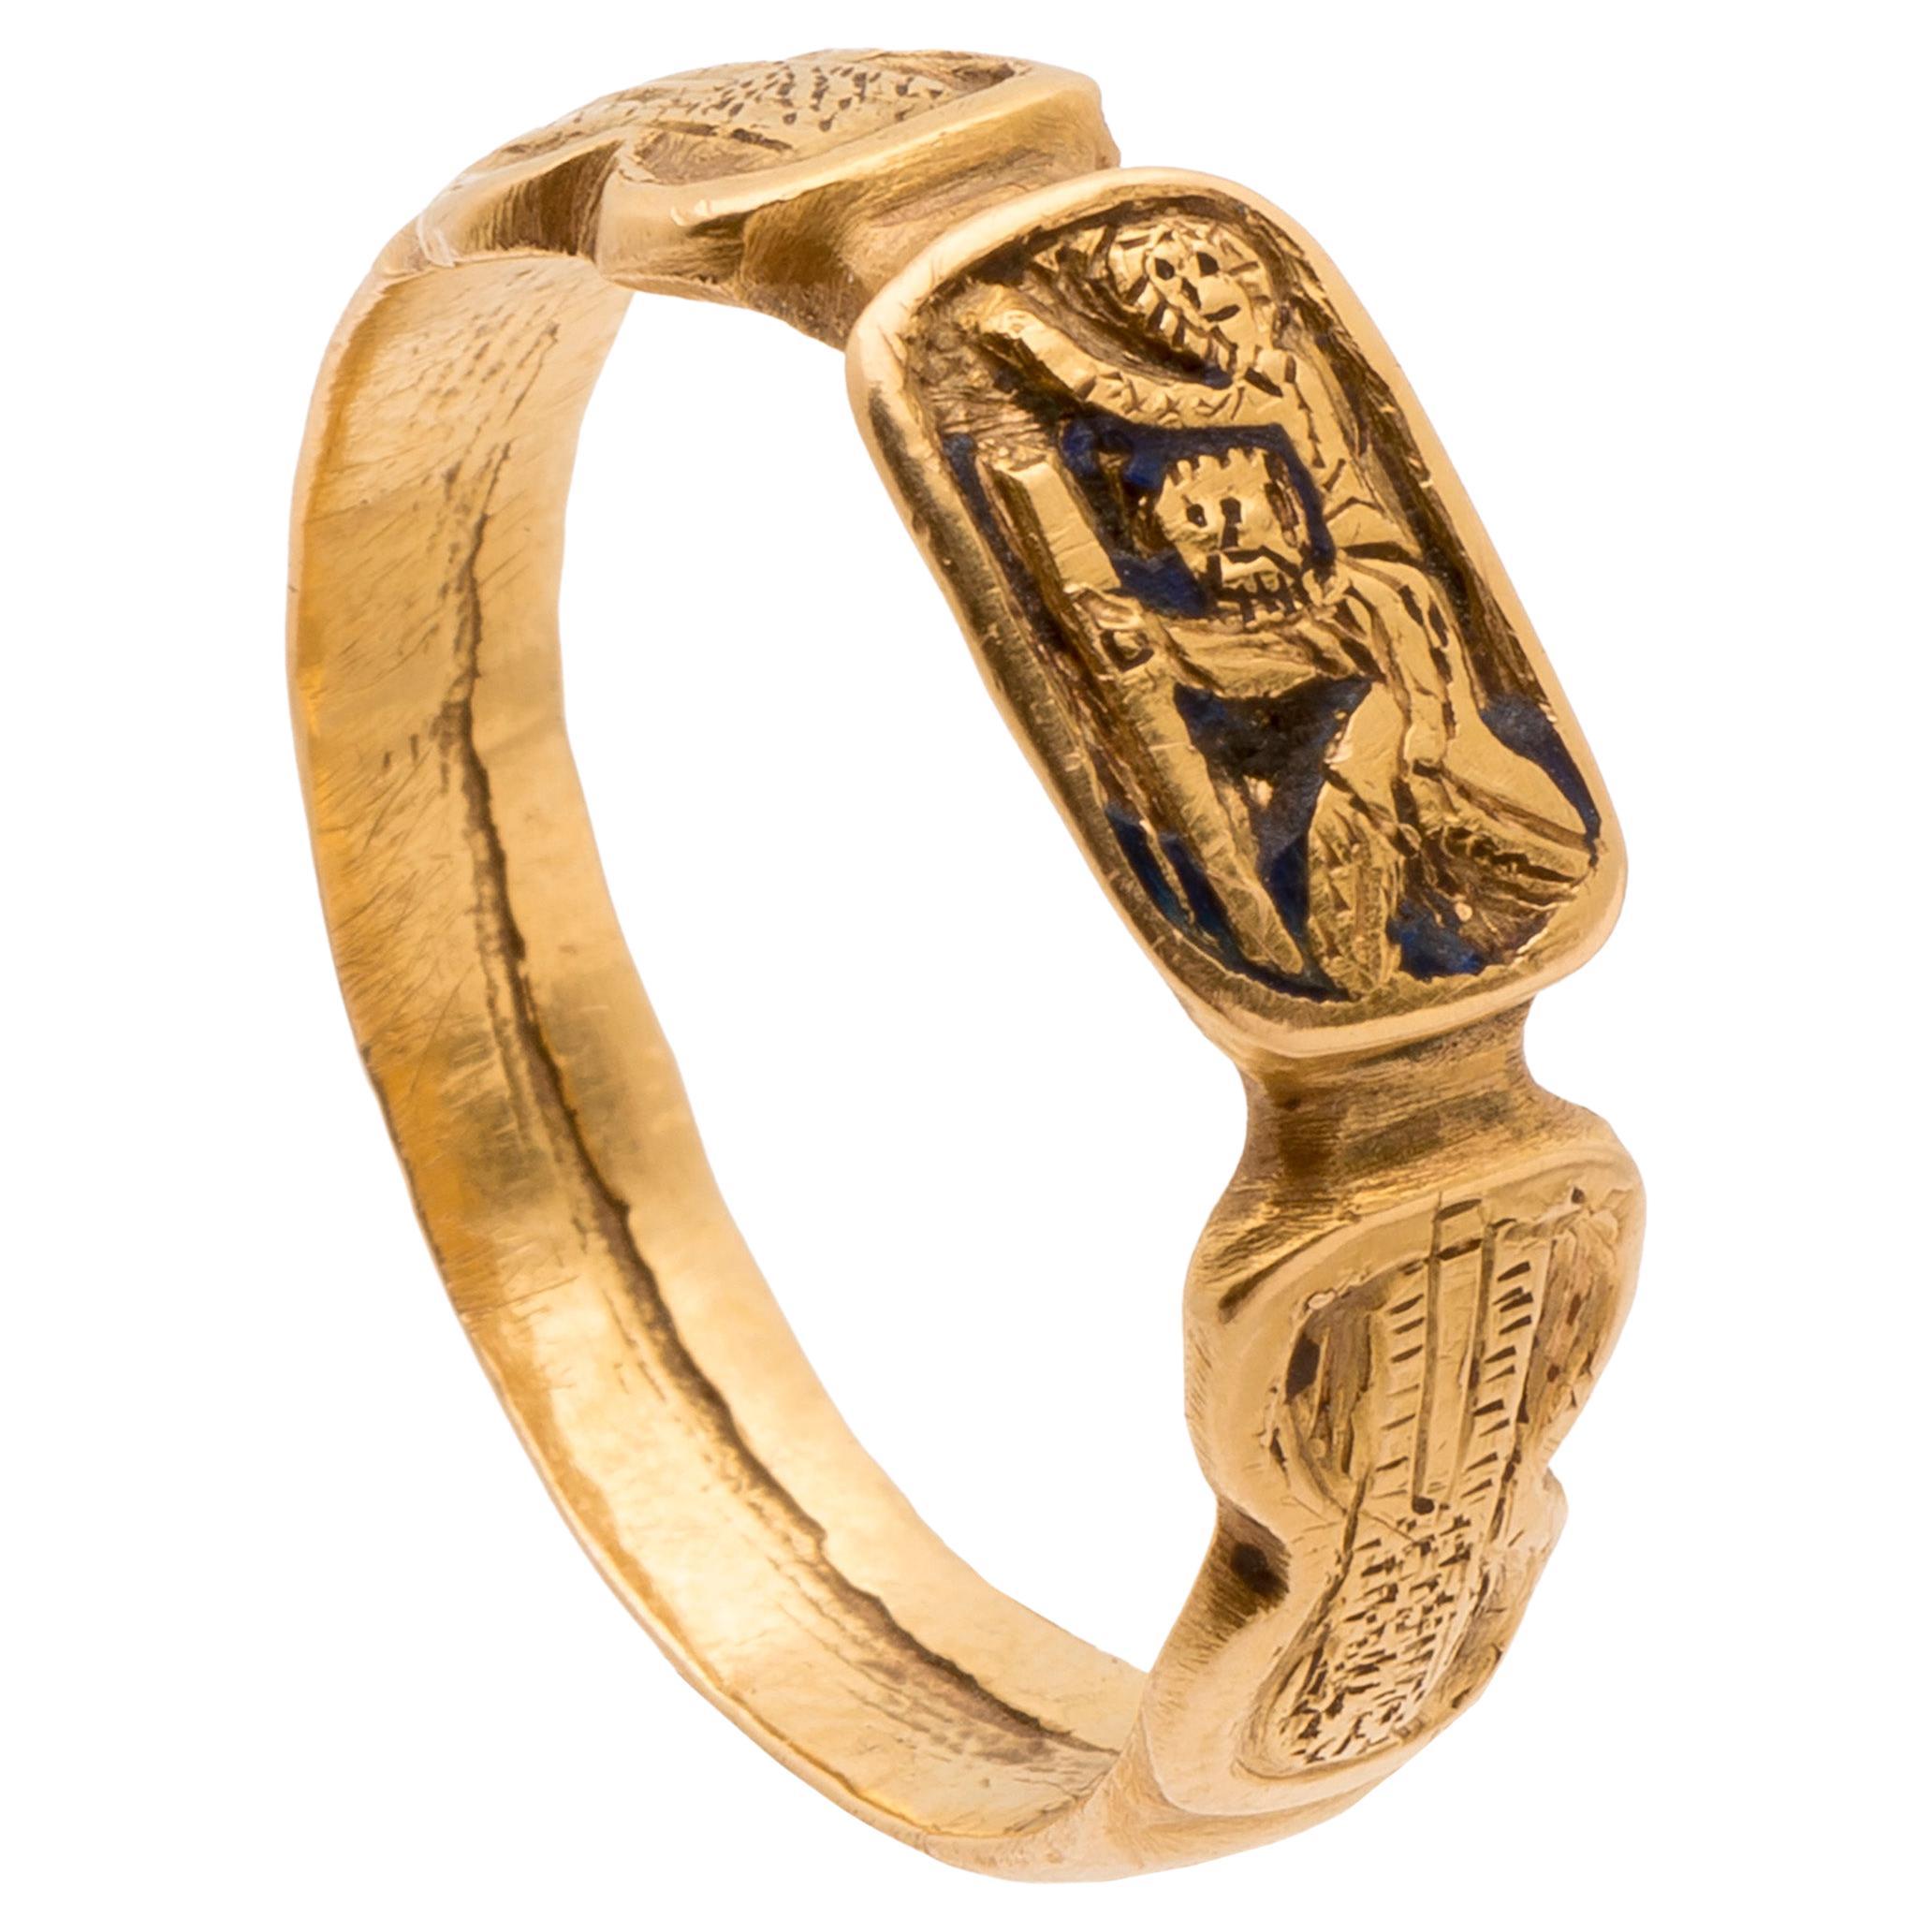 Antique Gold Iconographic Band Ring